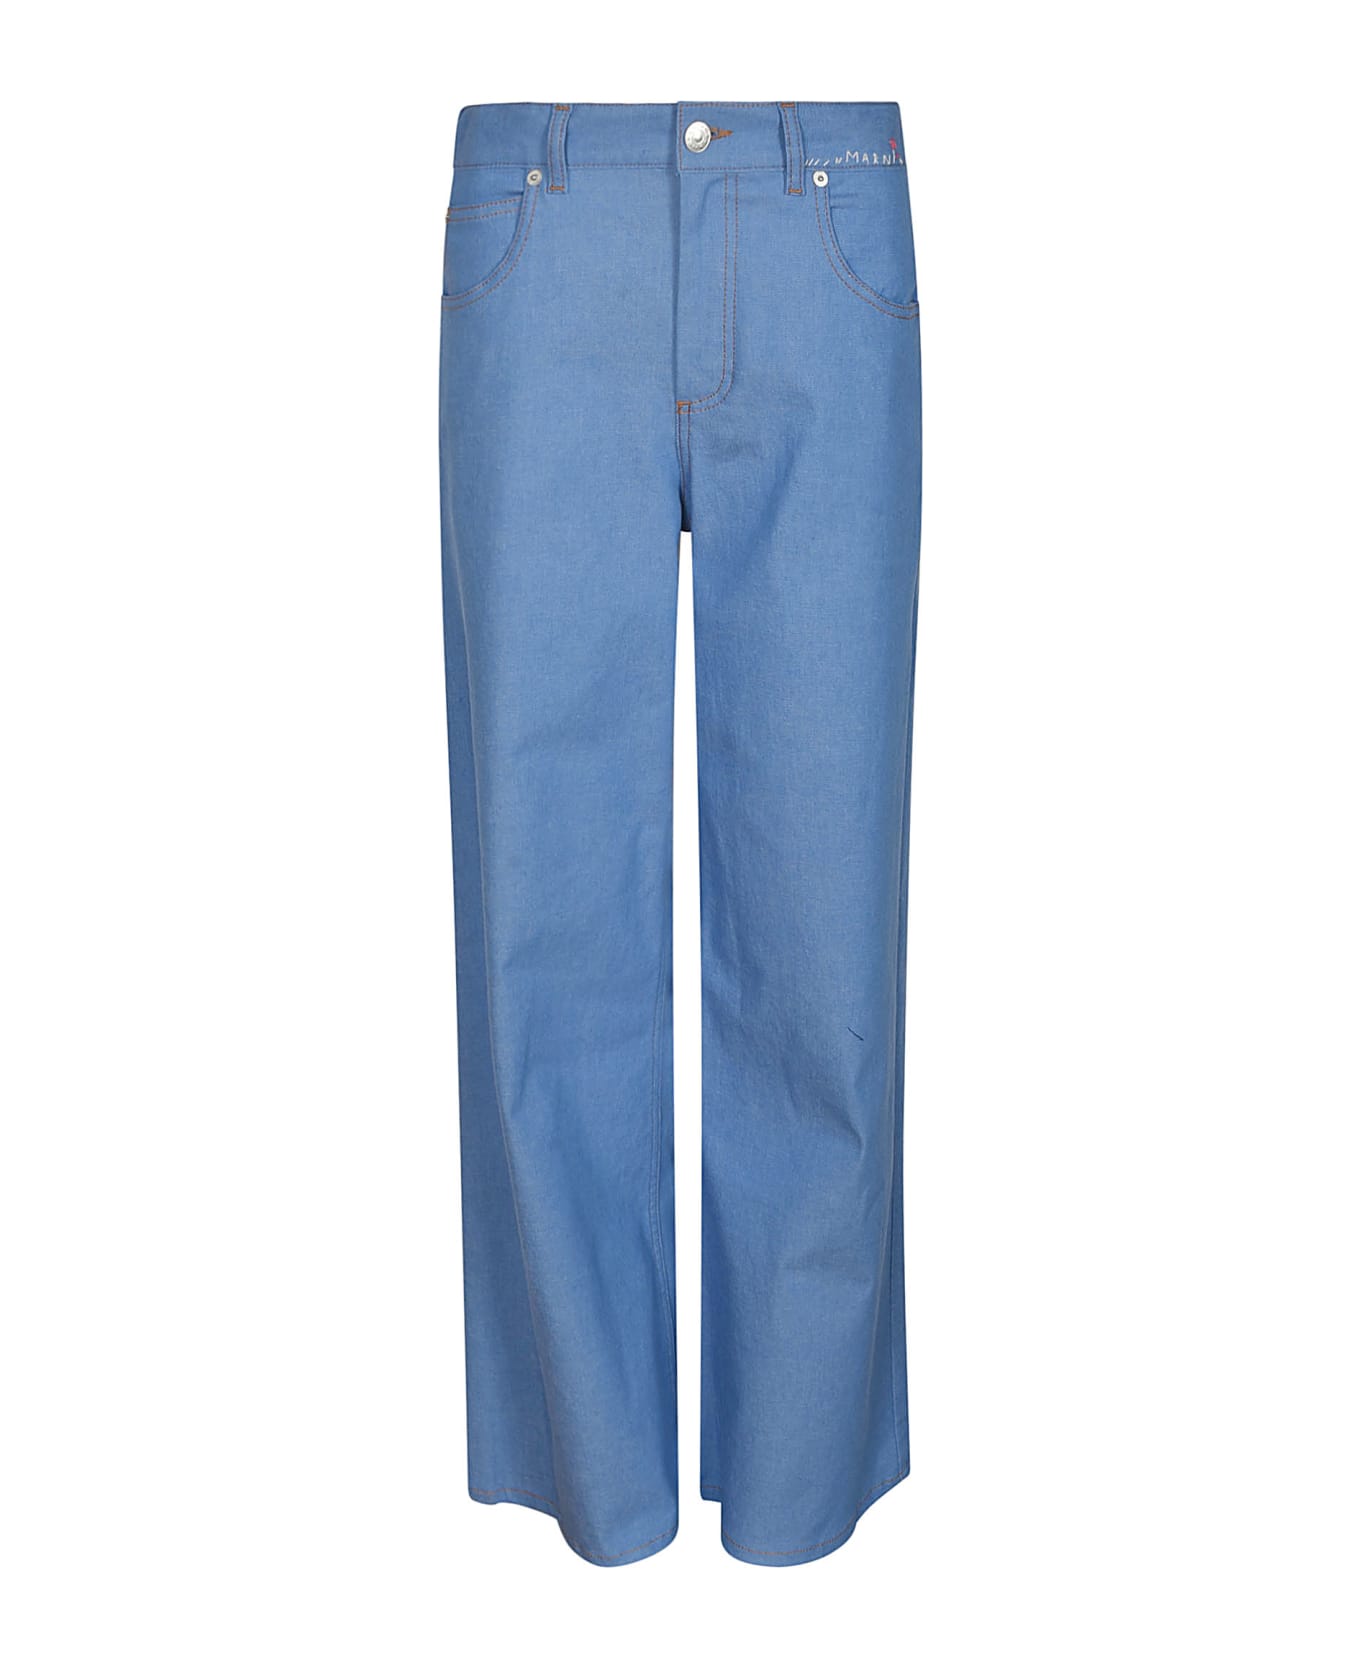 Marni Straight Buttoned Jeans - Blue